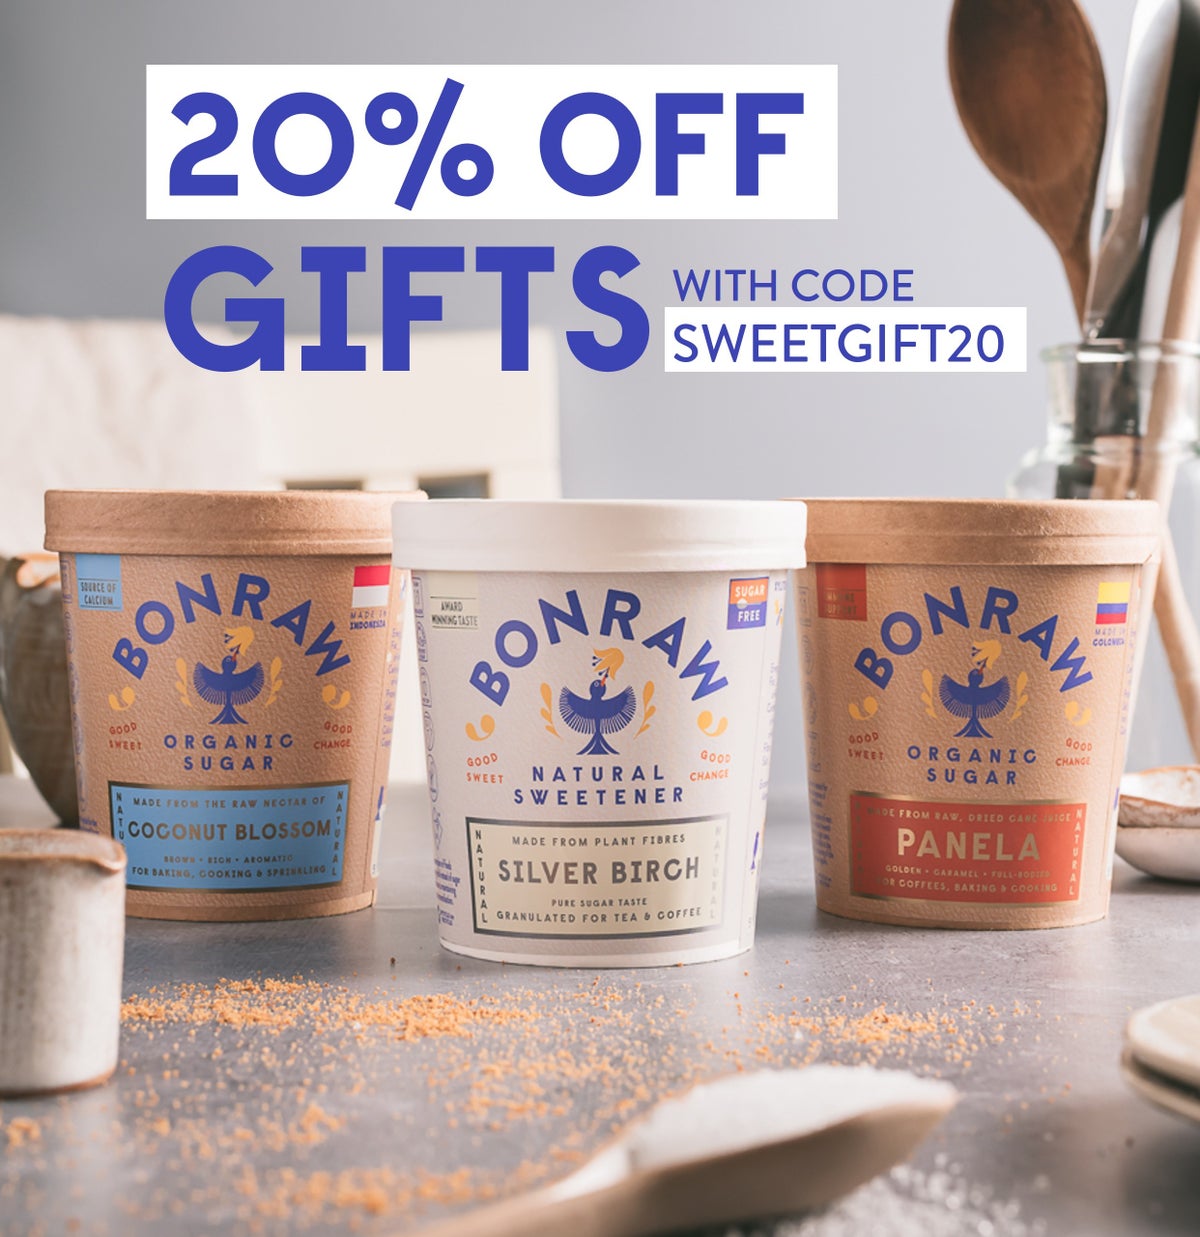 20% off Gifts with Code SweetGift20